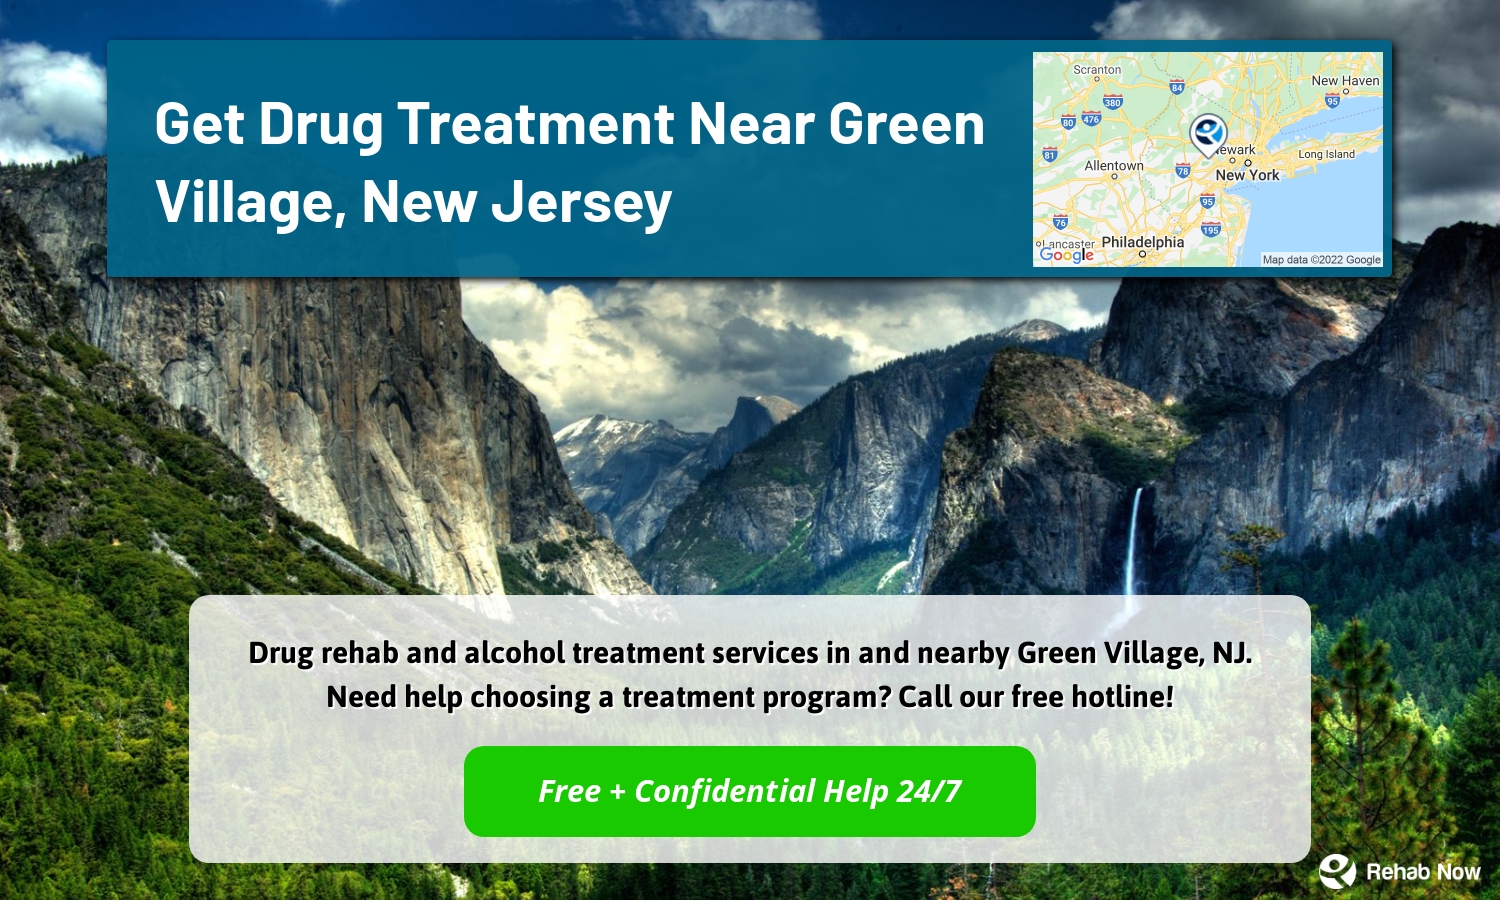 Drug rehab and alcohol treatment services in and nearby Green Village, NJ. Need help choosing a treatment program? Call our free hotline!